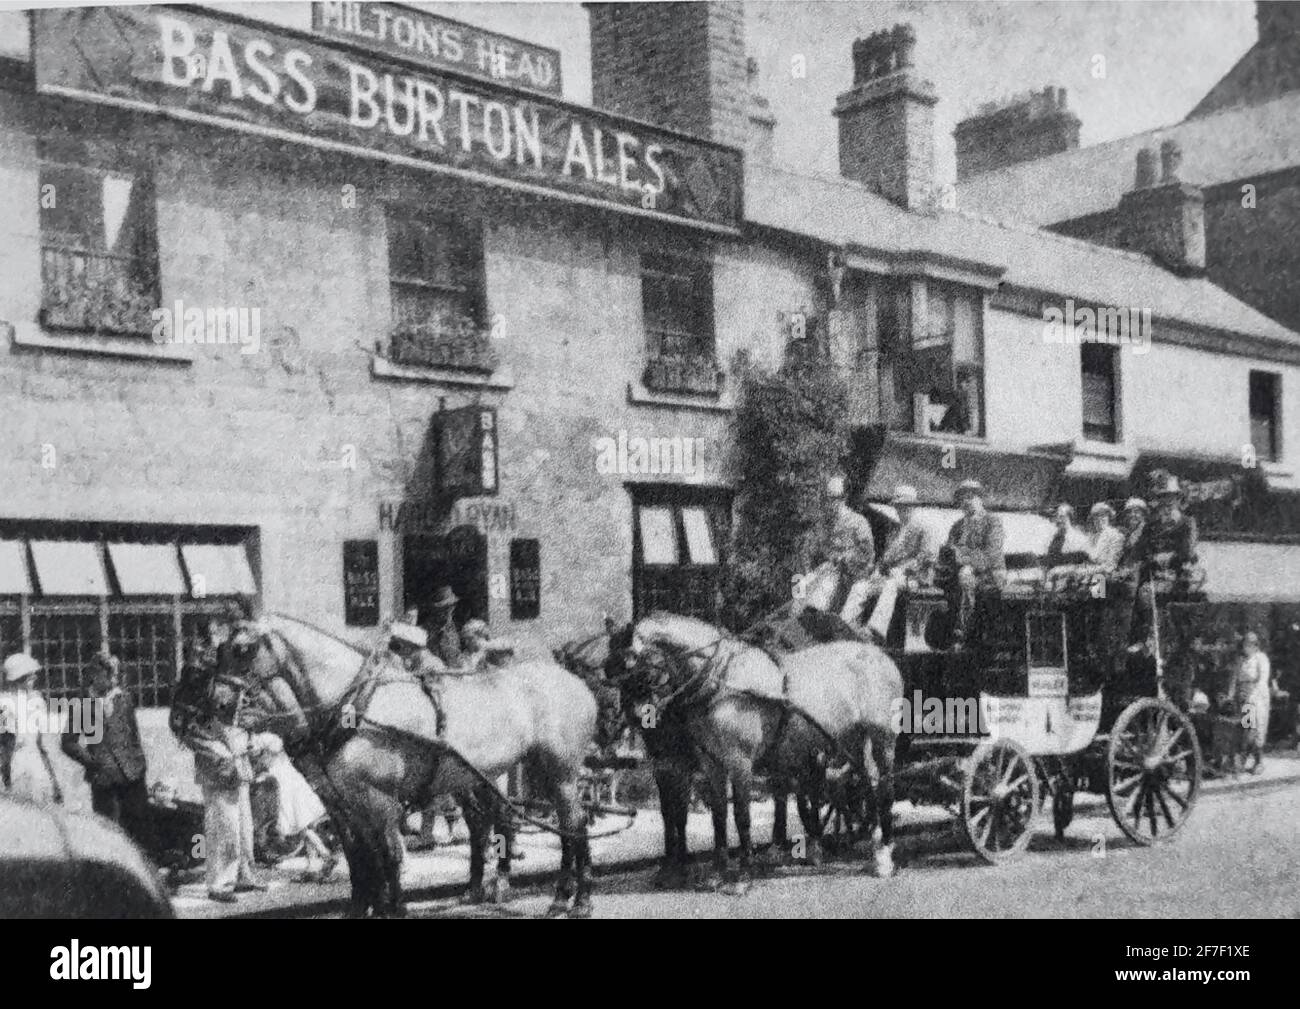 Vintage photograph of the Miltons Head in Buxton, Derbyshire. Old pub with coach and horses outside with bystanders and passengers looking on. Stock Photo